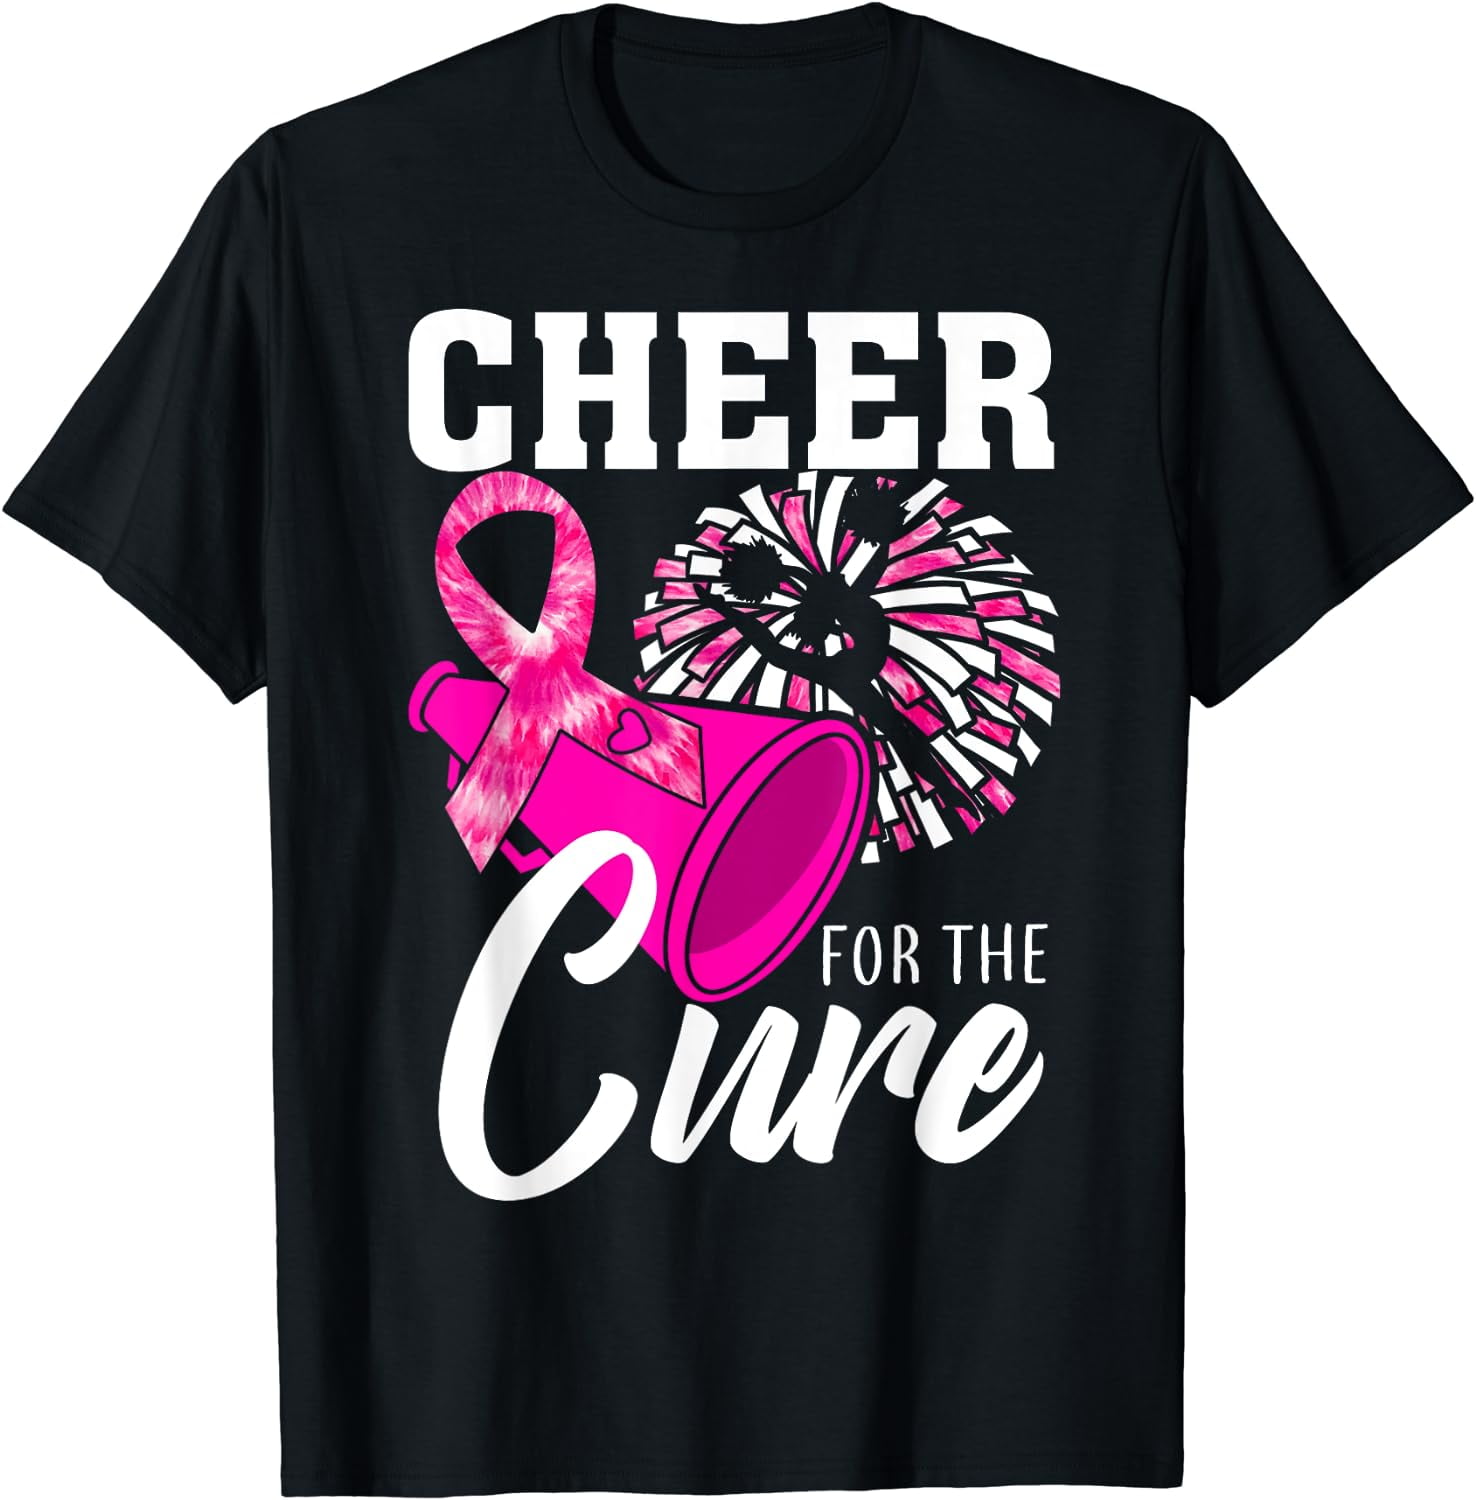 Cheer for The Cure Breast Cancer Awareness Month Cheerleader T